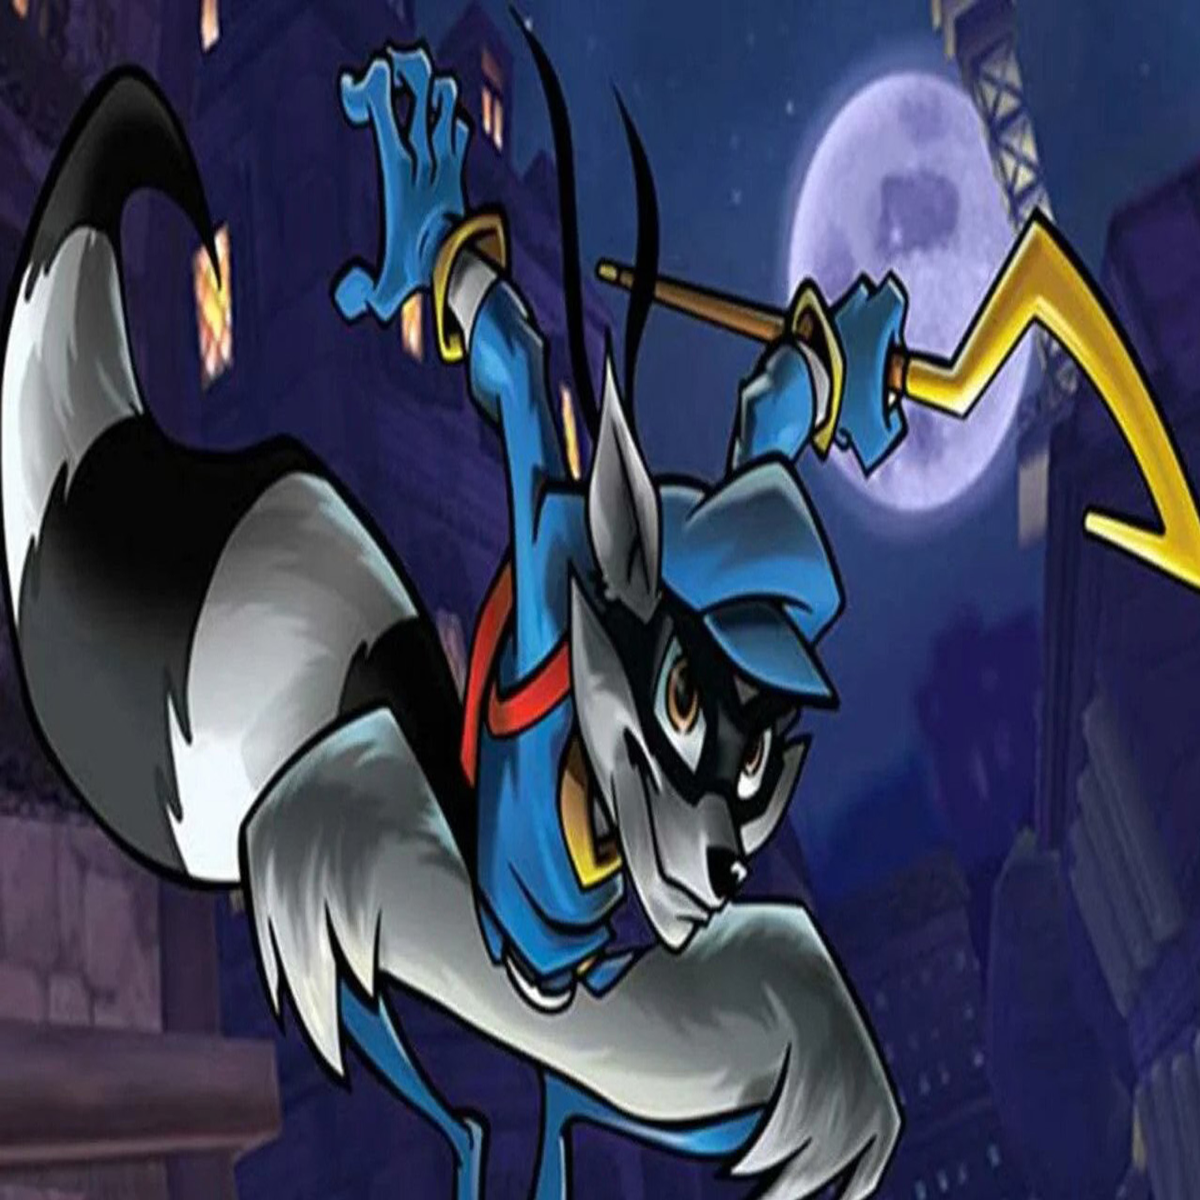 SLY 5 LEAKED FOR THE GAME AWARDS! - Sly Cooper News 